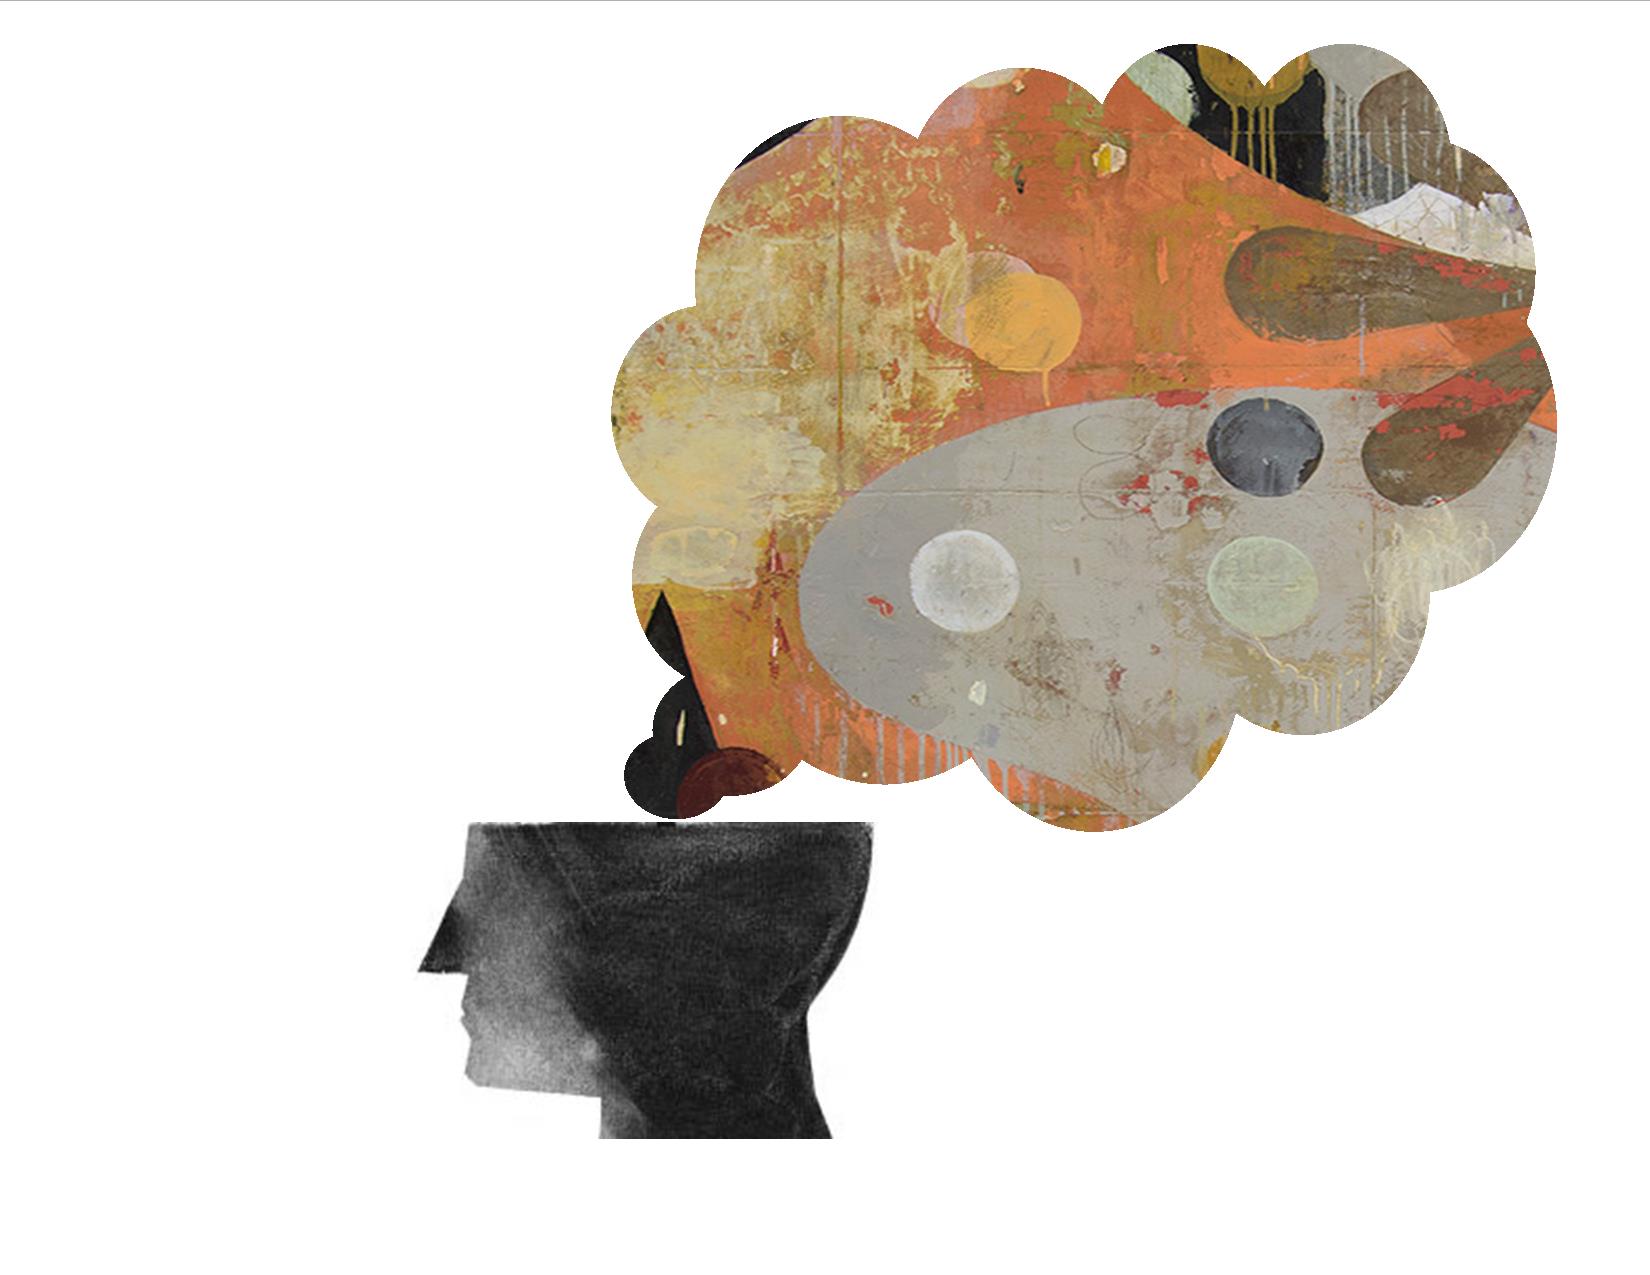 painting of silhouette profile face with painted symbols in thought balloon above